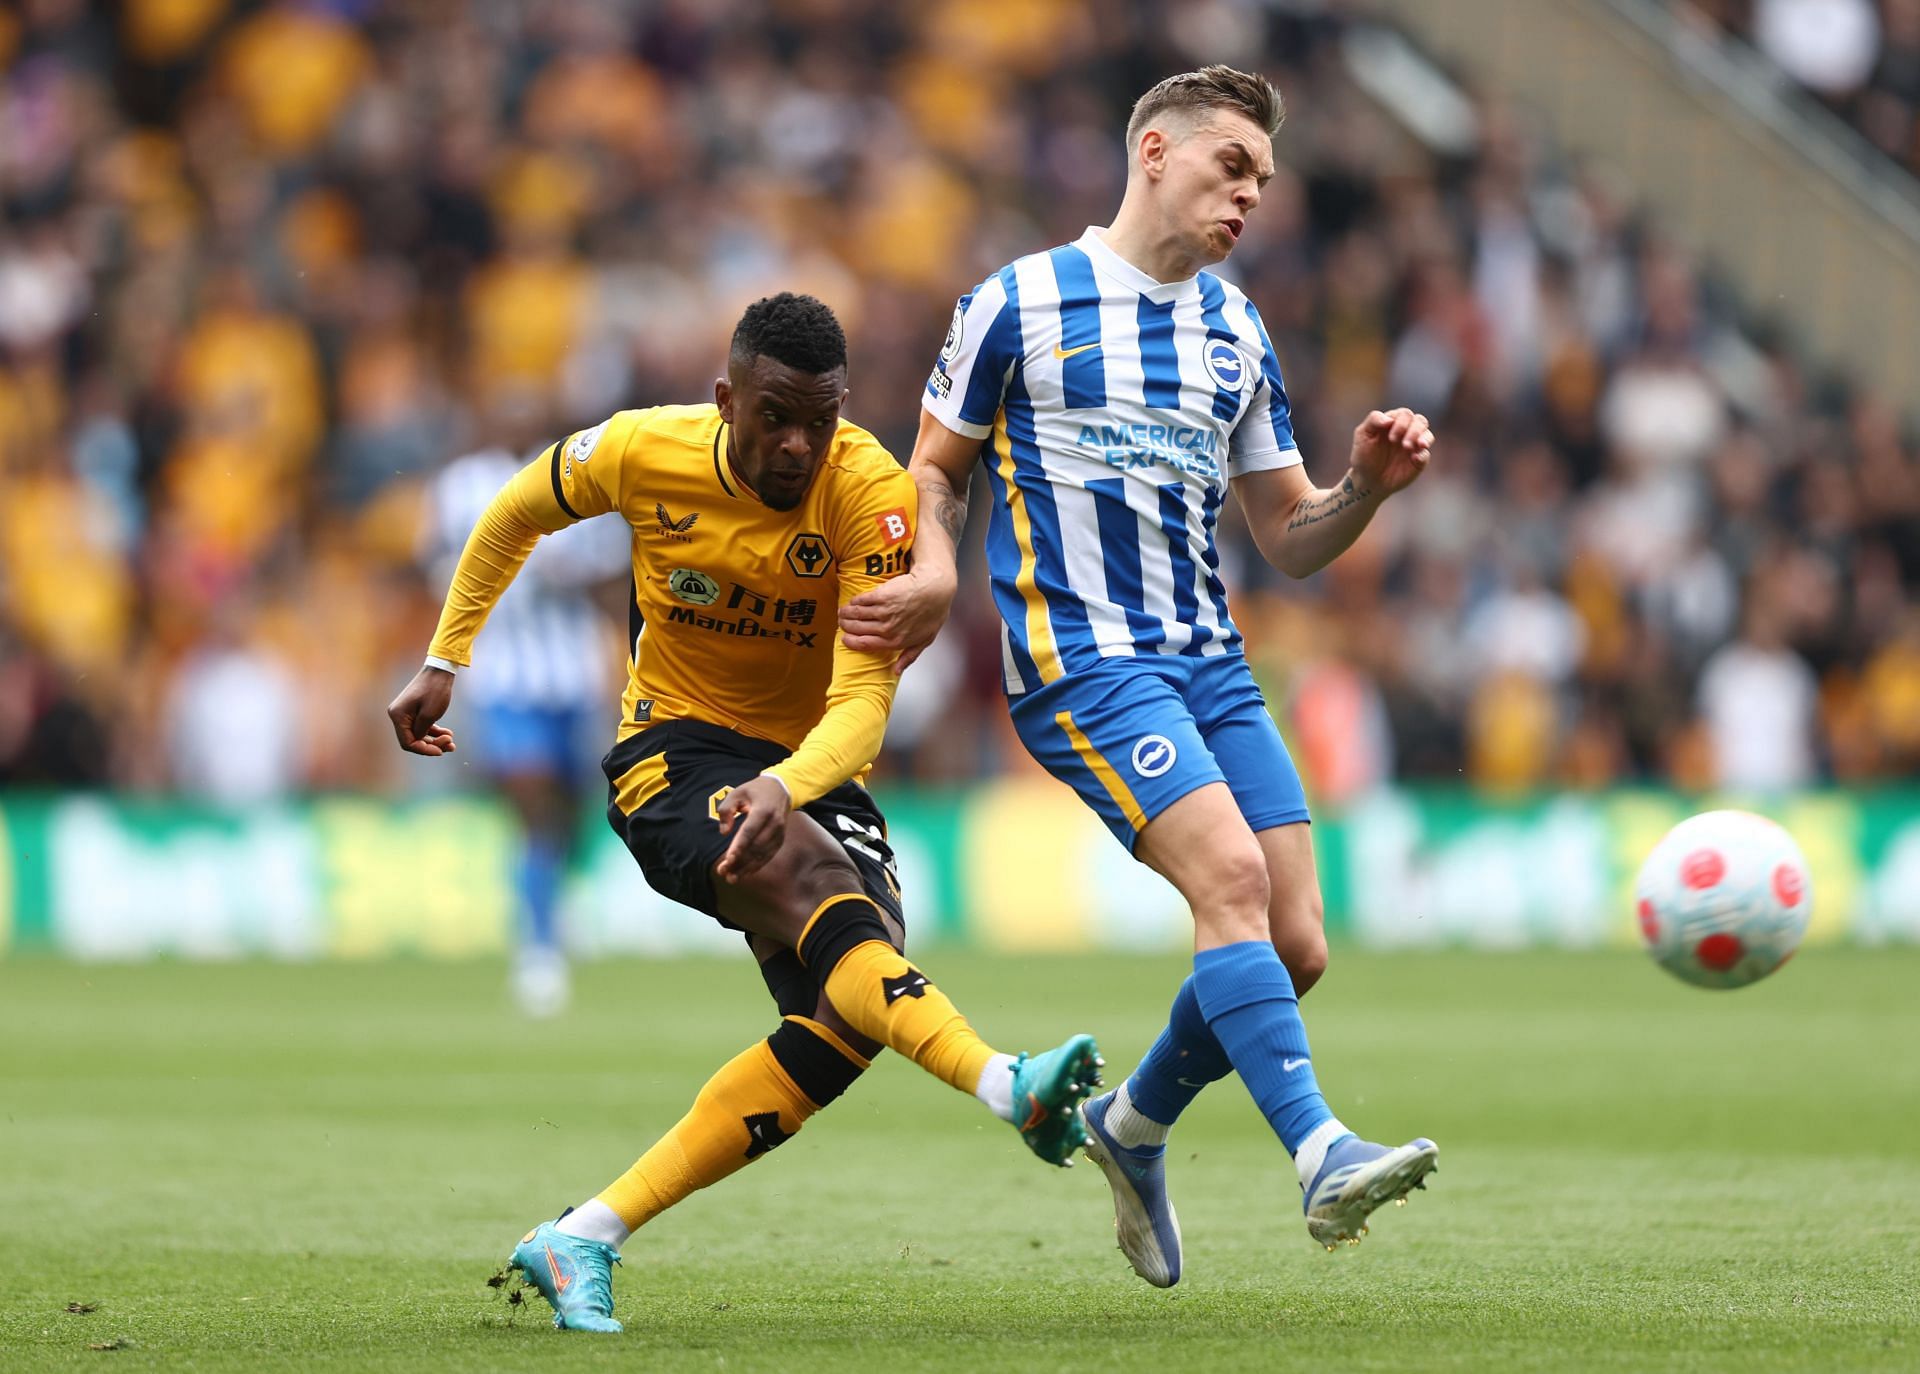 - (Photo by Naomi Baker/Getty Images) - Wolverhampton Wanderers v Brighton &amp; Hove Albion - Premier League